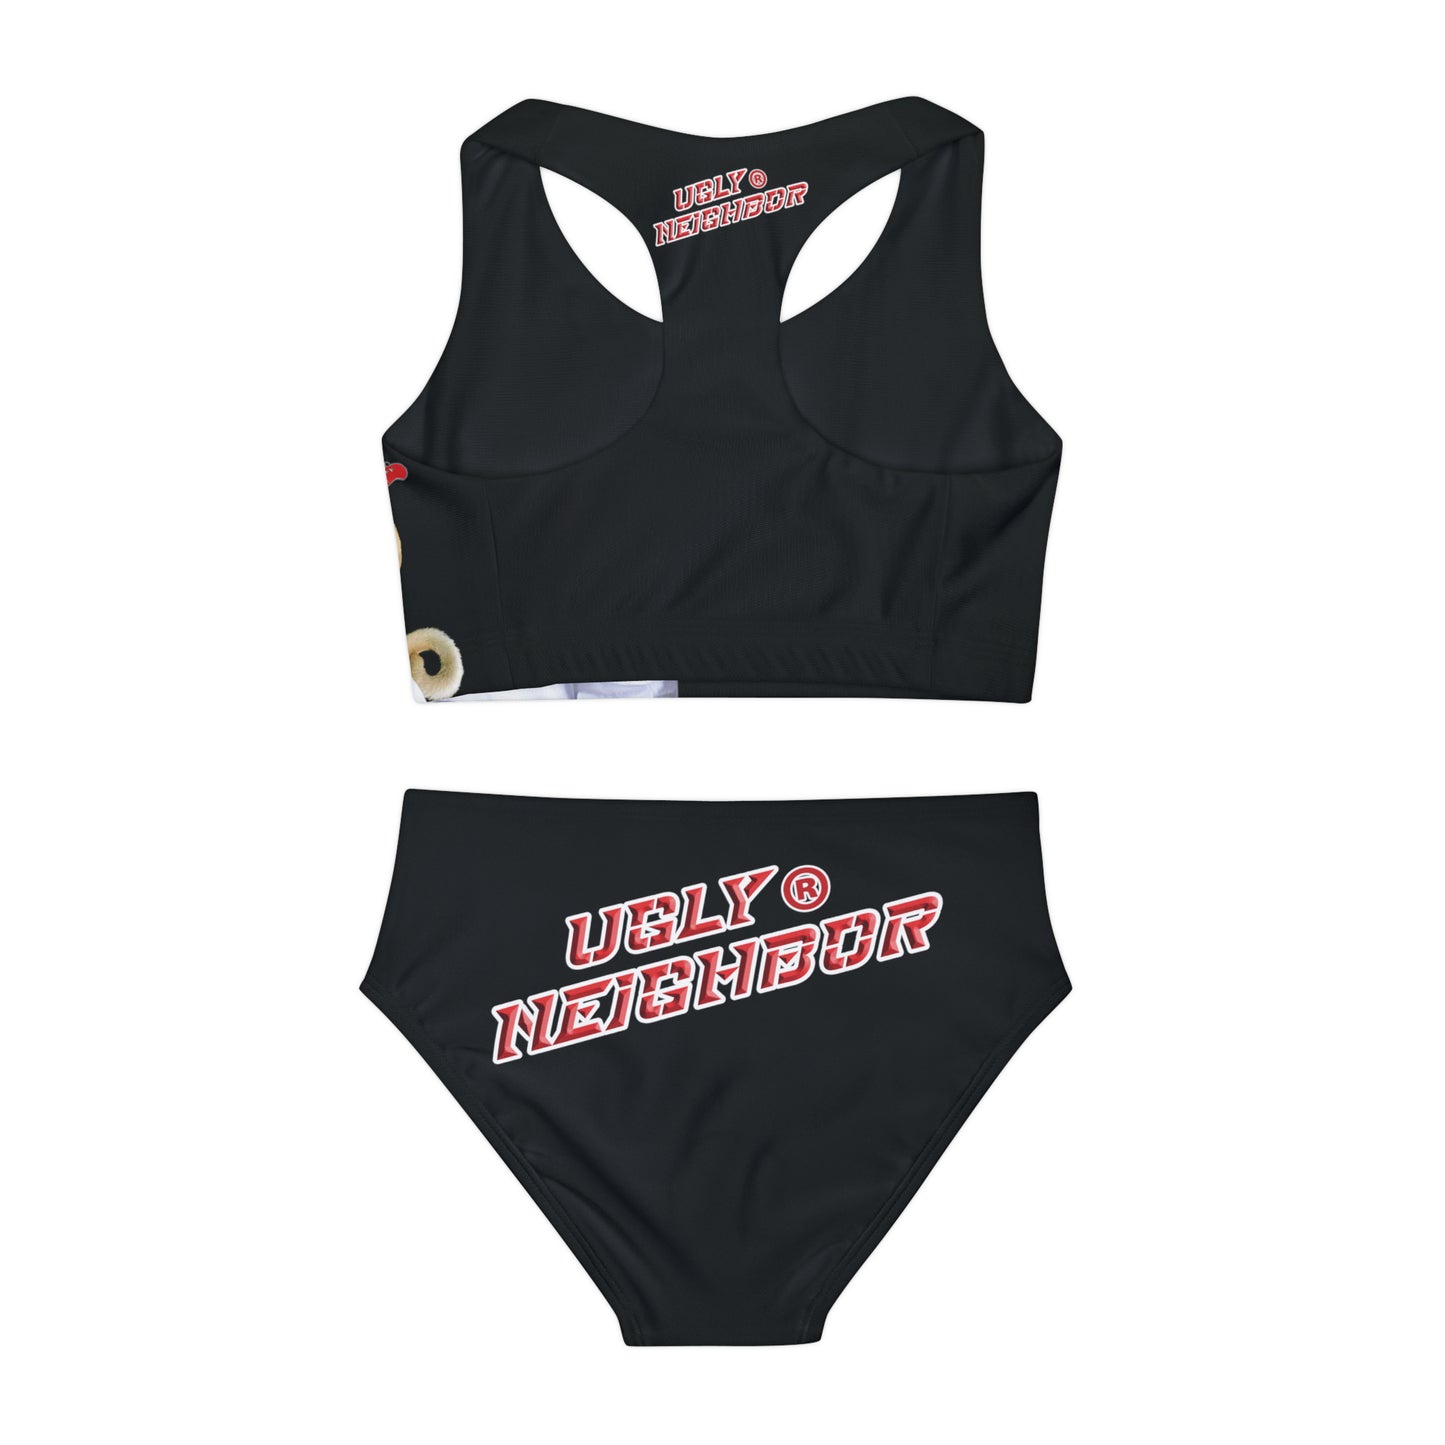 Ugly Neighbor Lassie Two Piece Swimsuit